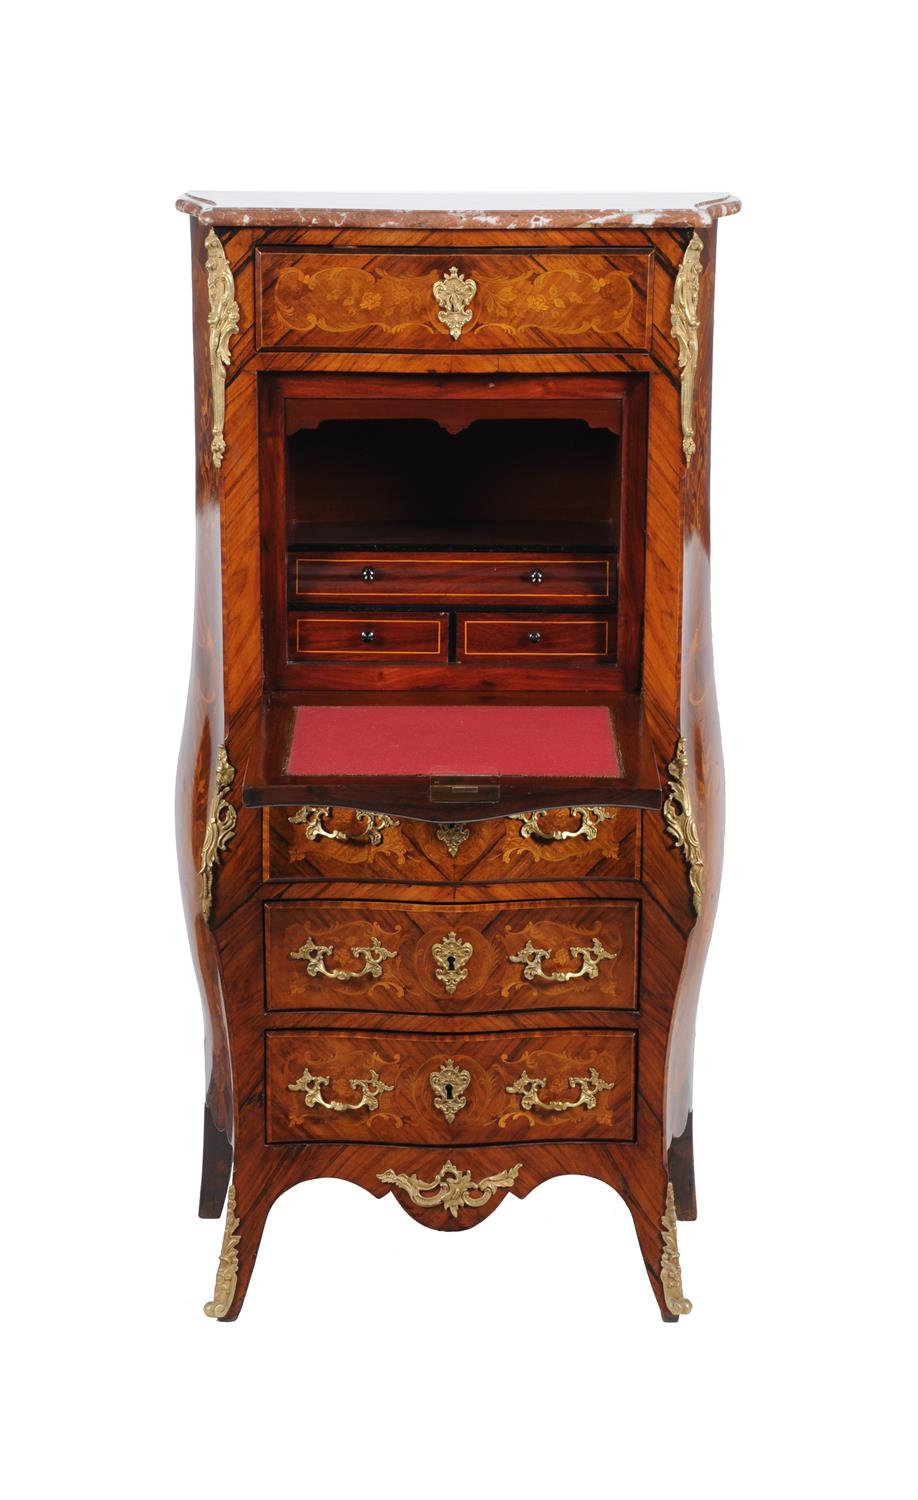 Y A French kingwood and marquetry inlaid secretaire a abattant - Image 2 of 3